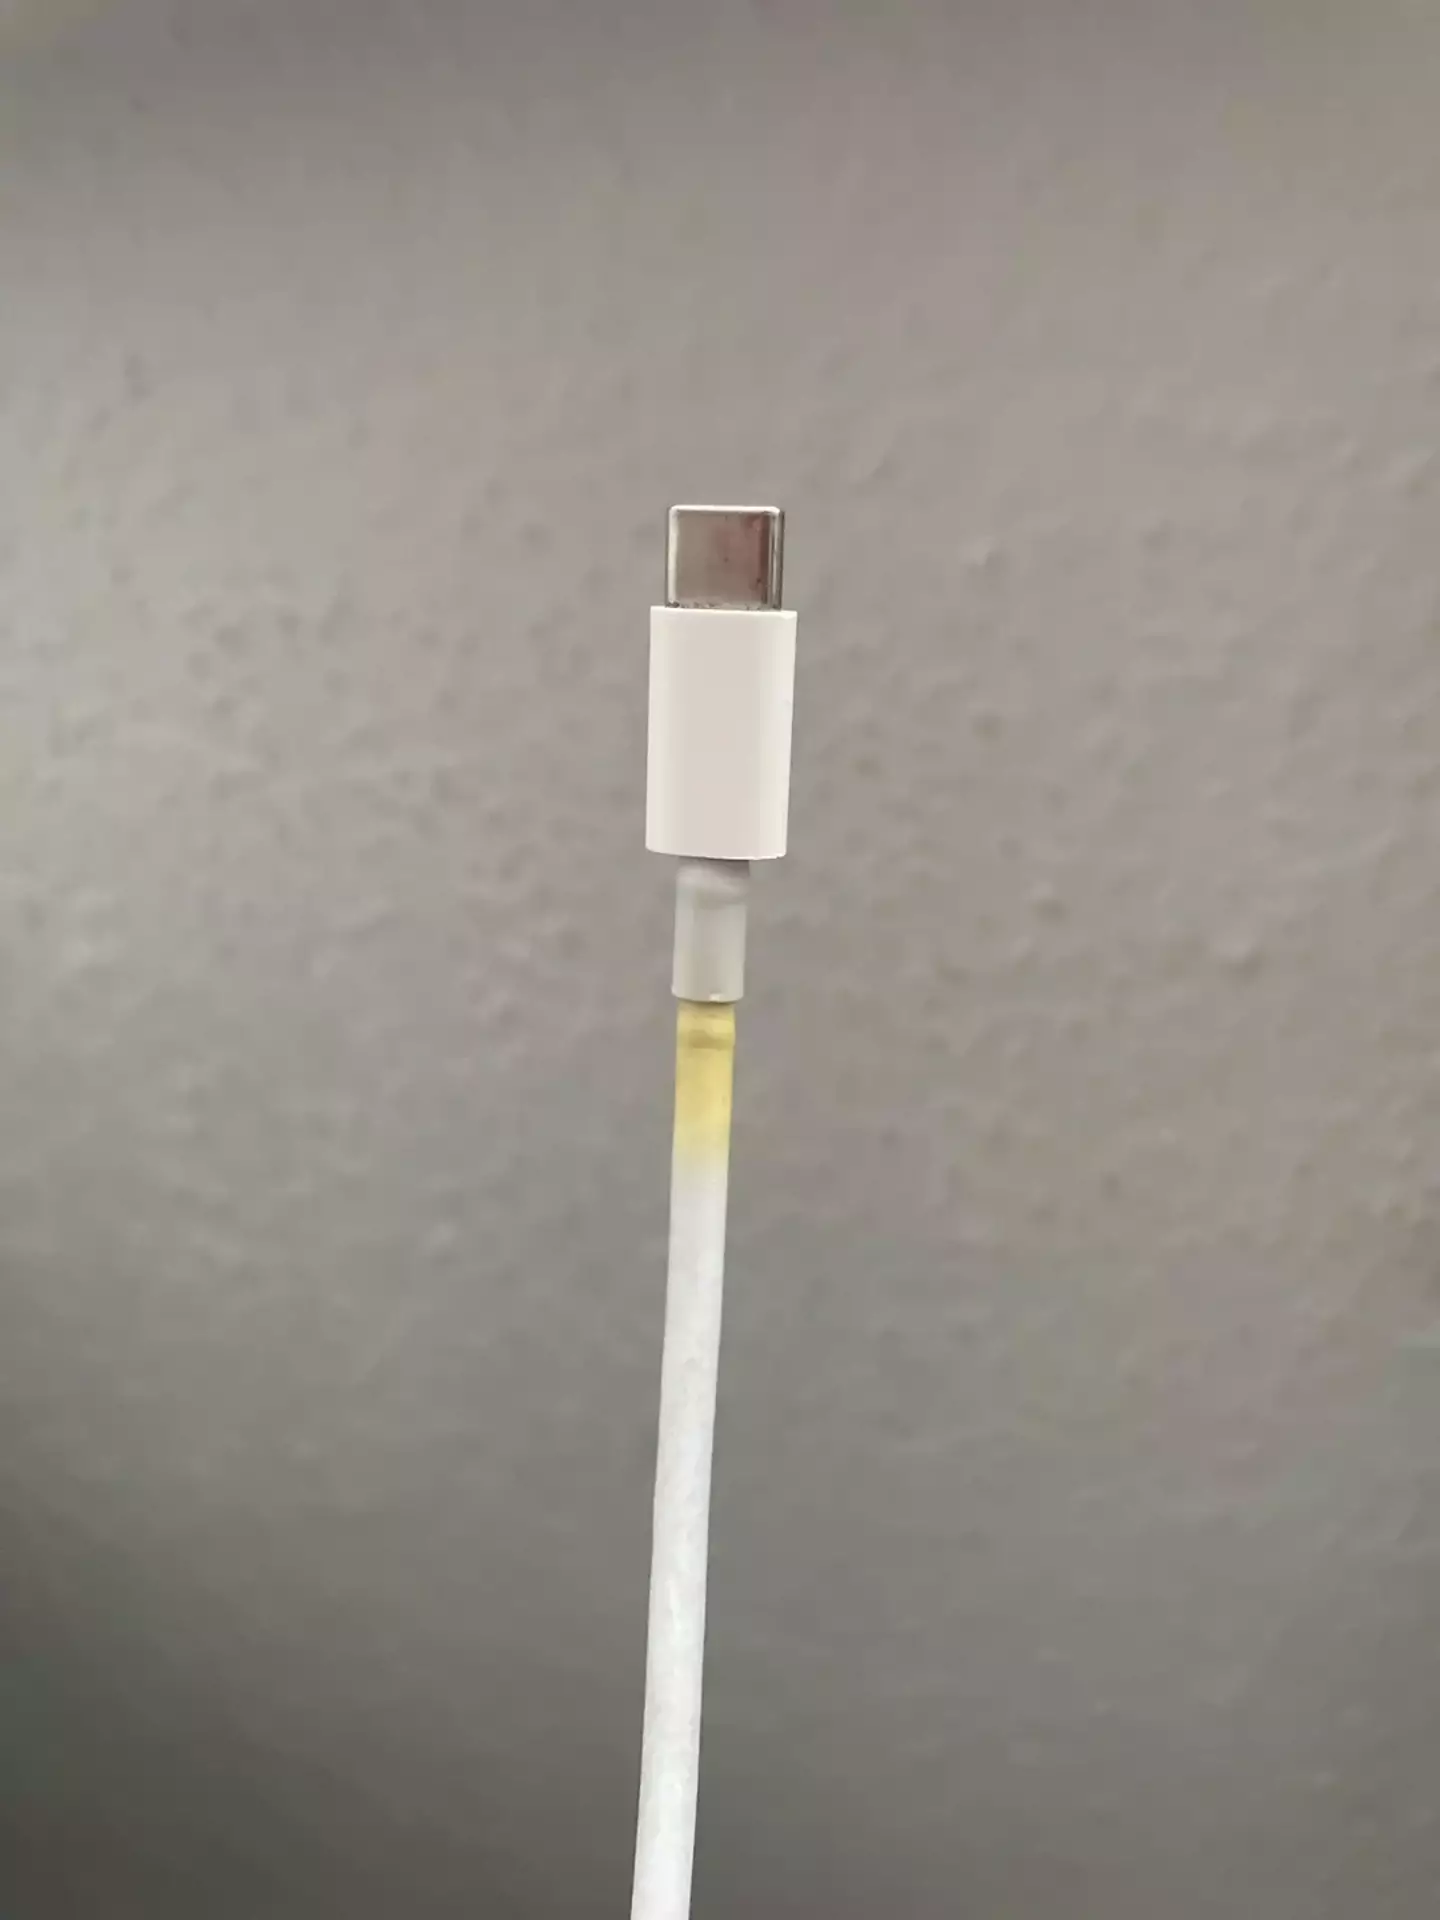 You might want to get a new charger if it's beginning to yellow.